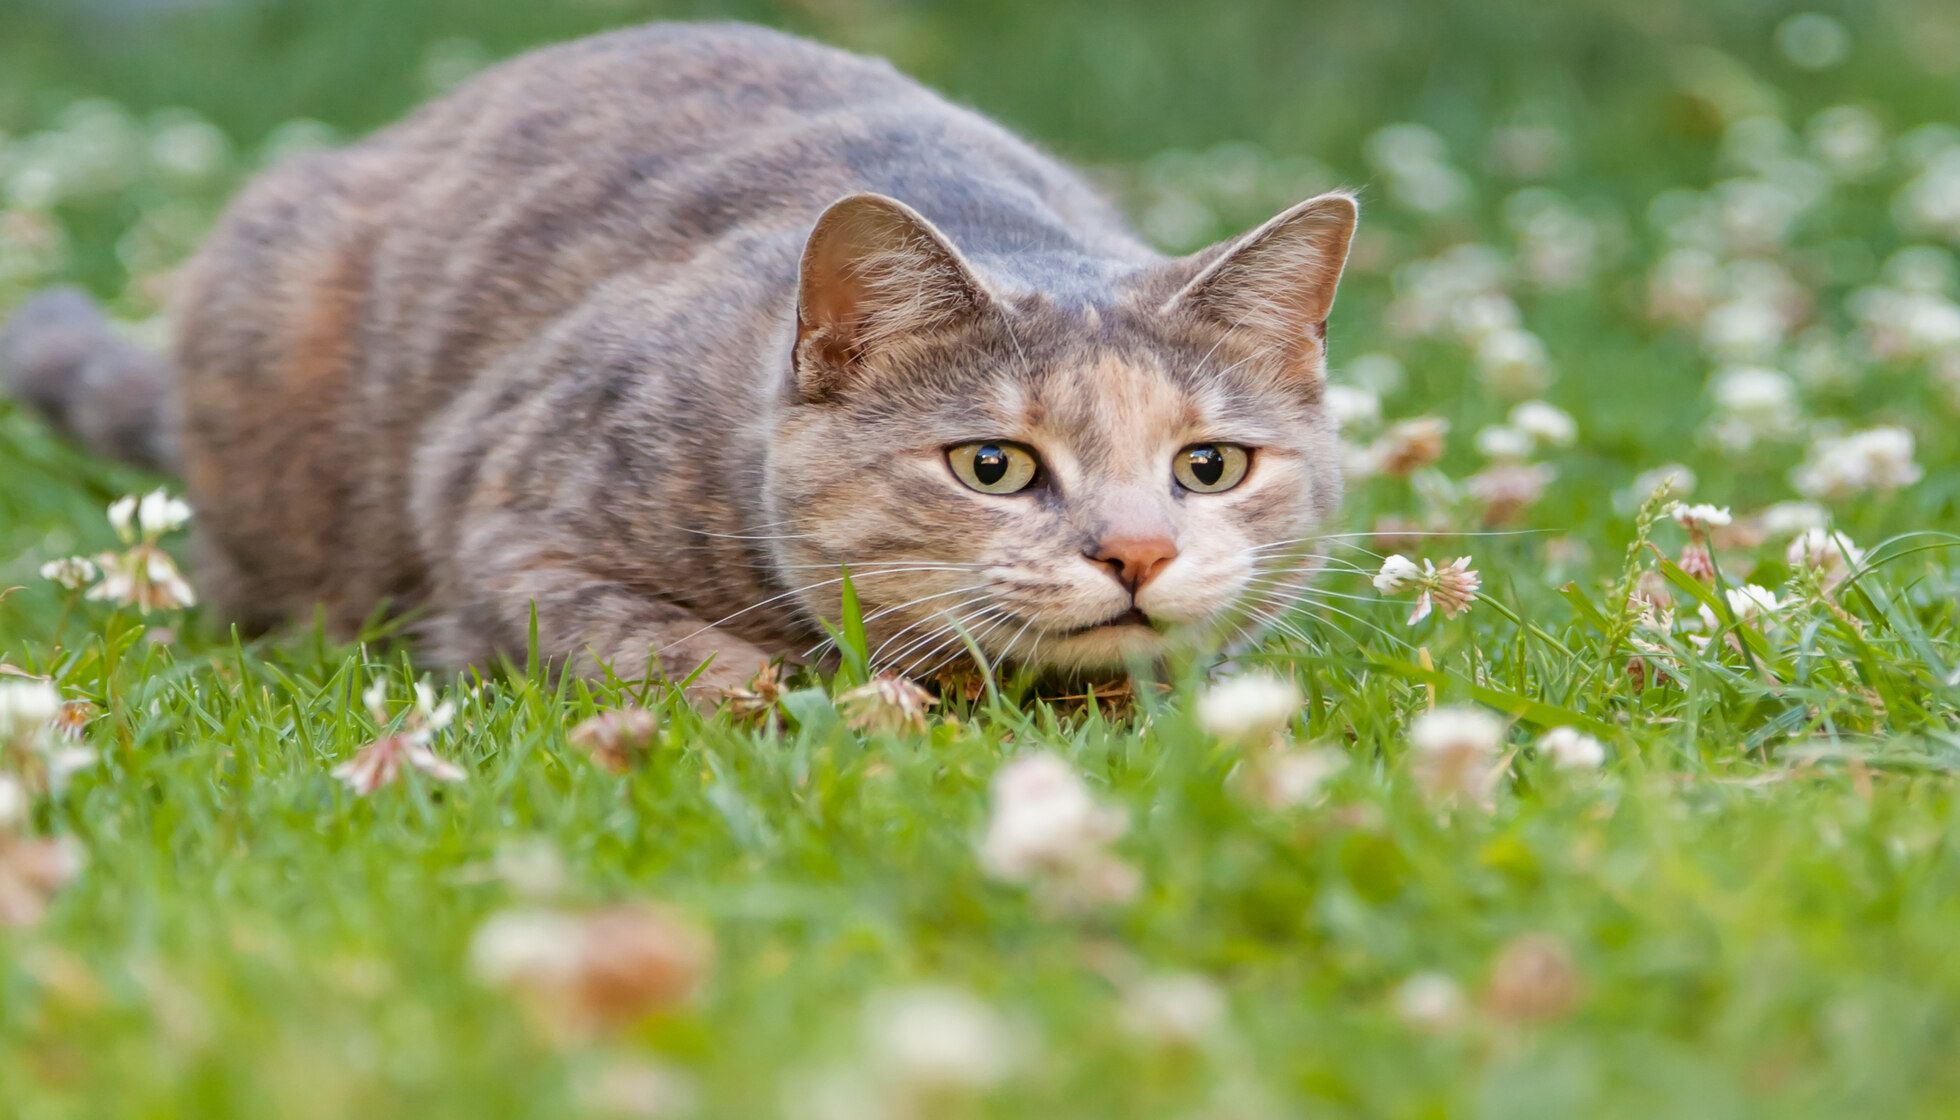 Why Do Cats Bring You Dead Animals? Weird Cat Behaviors Explained | Kidadl